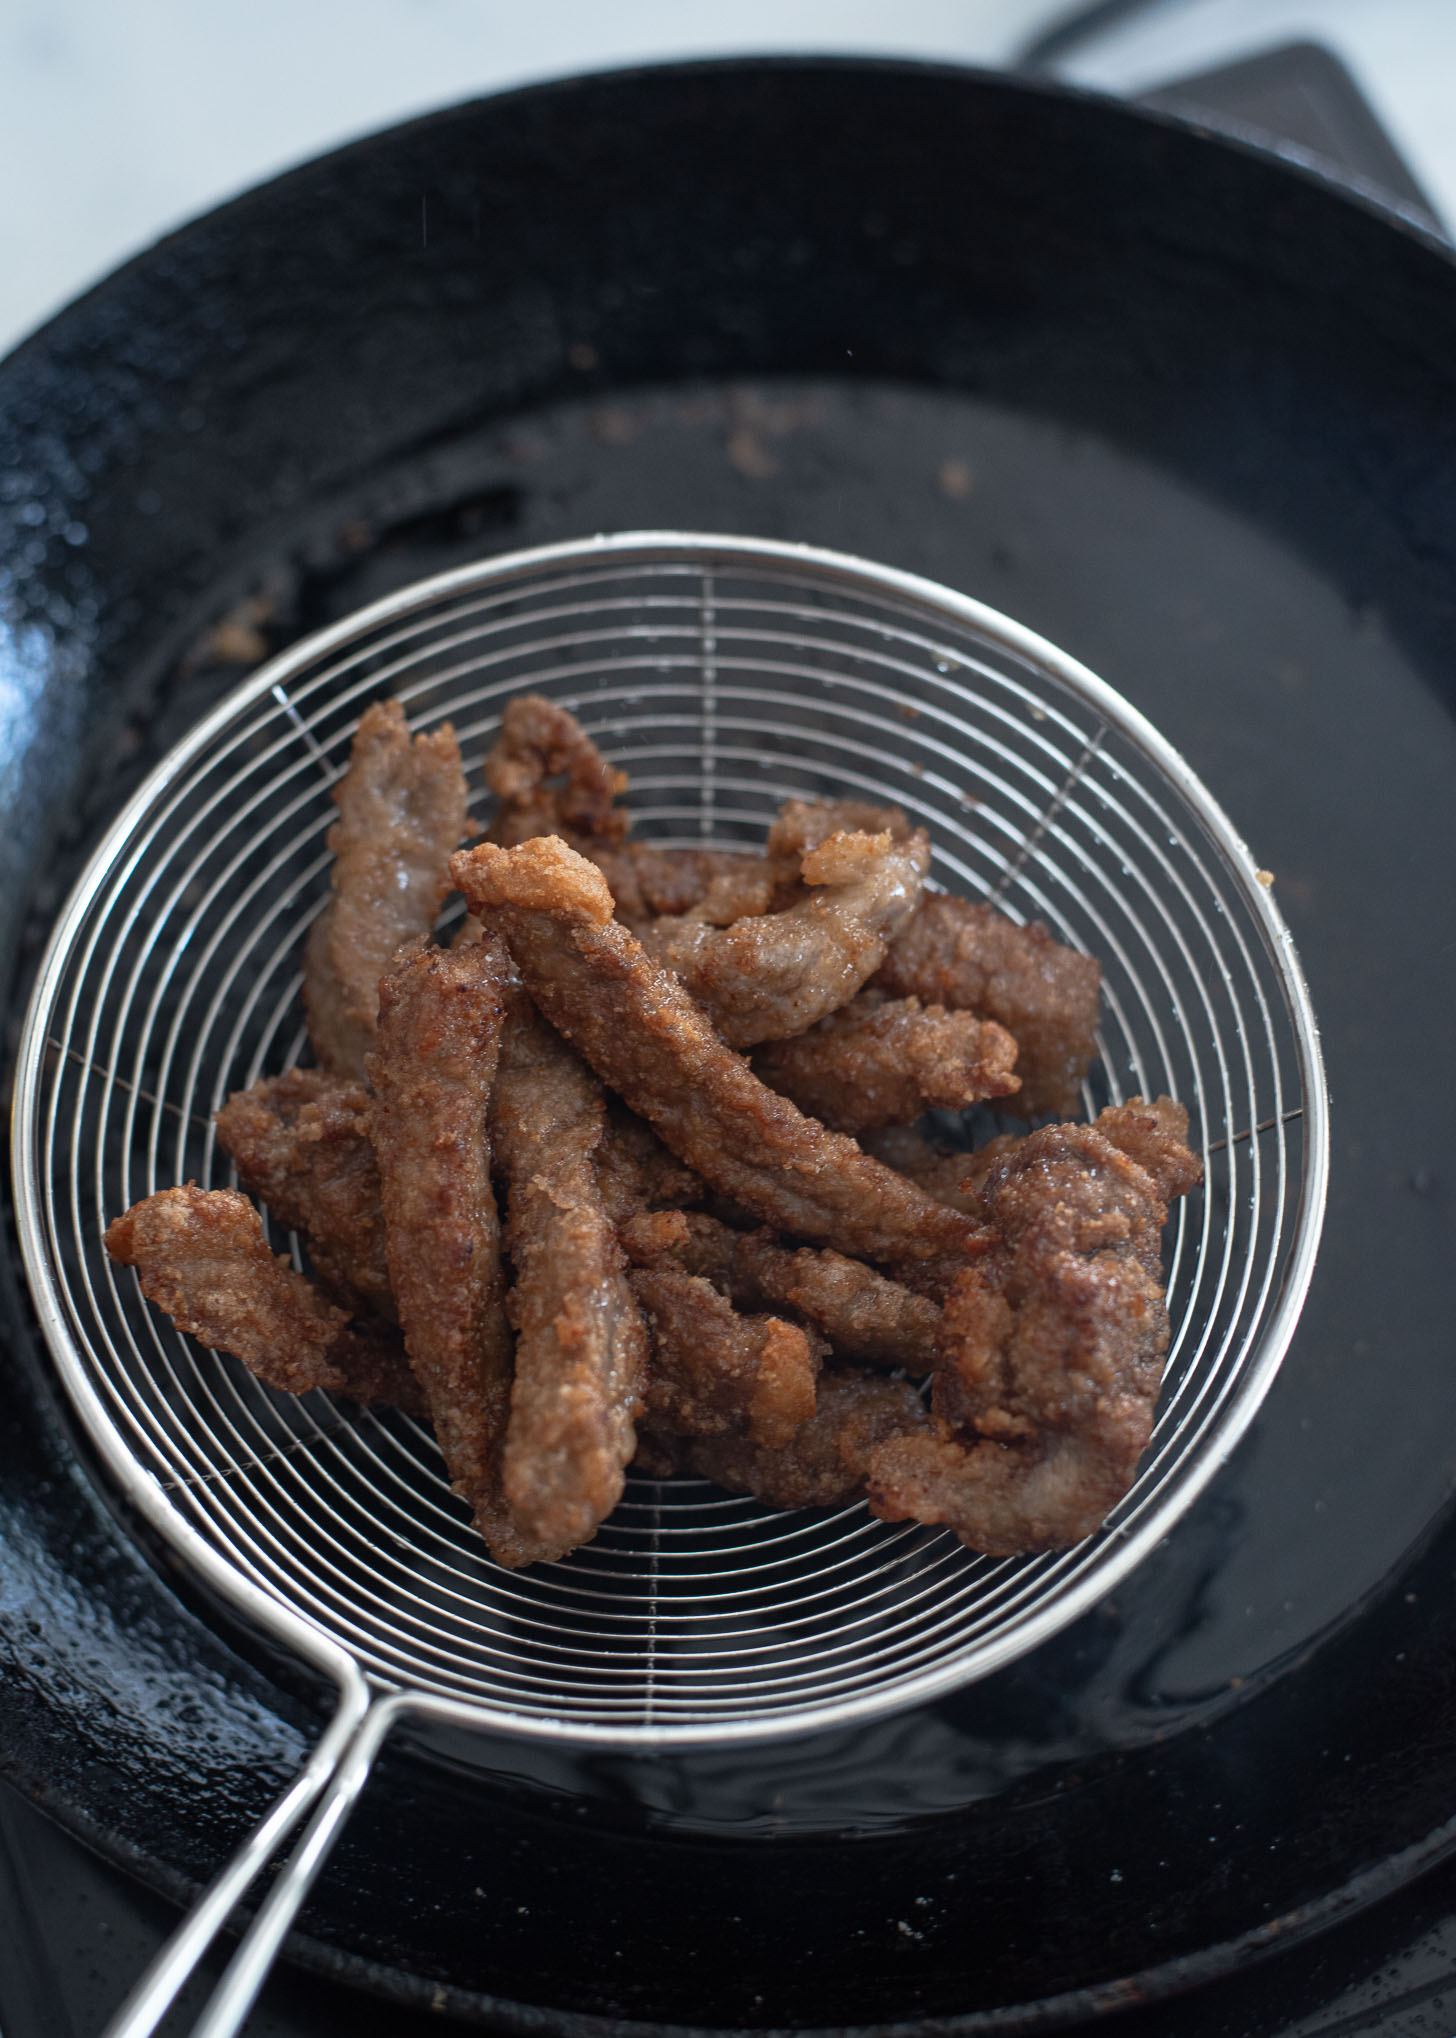 Double deep fried beed strips are drained from oil to make crispy beef.